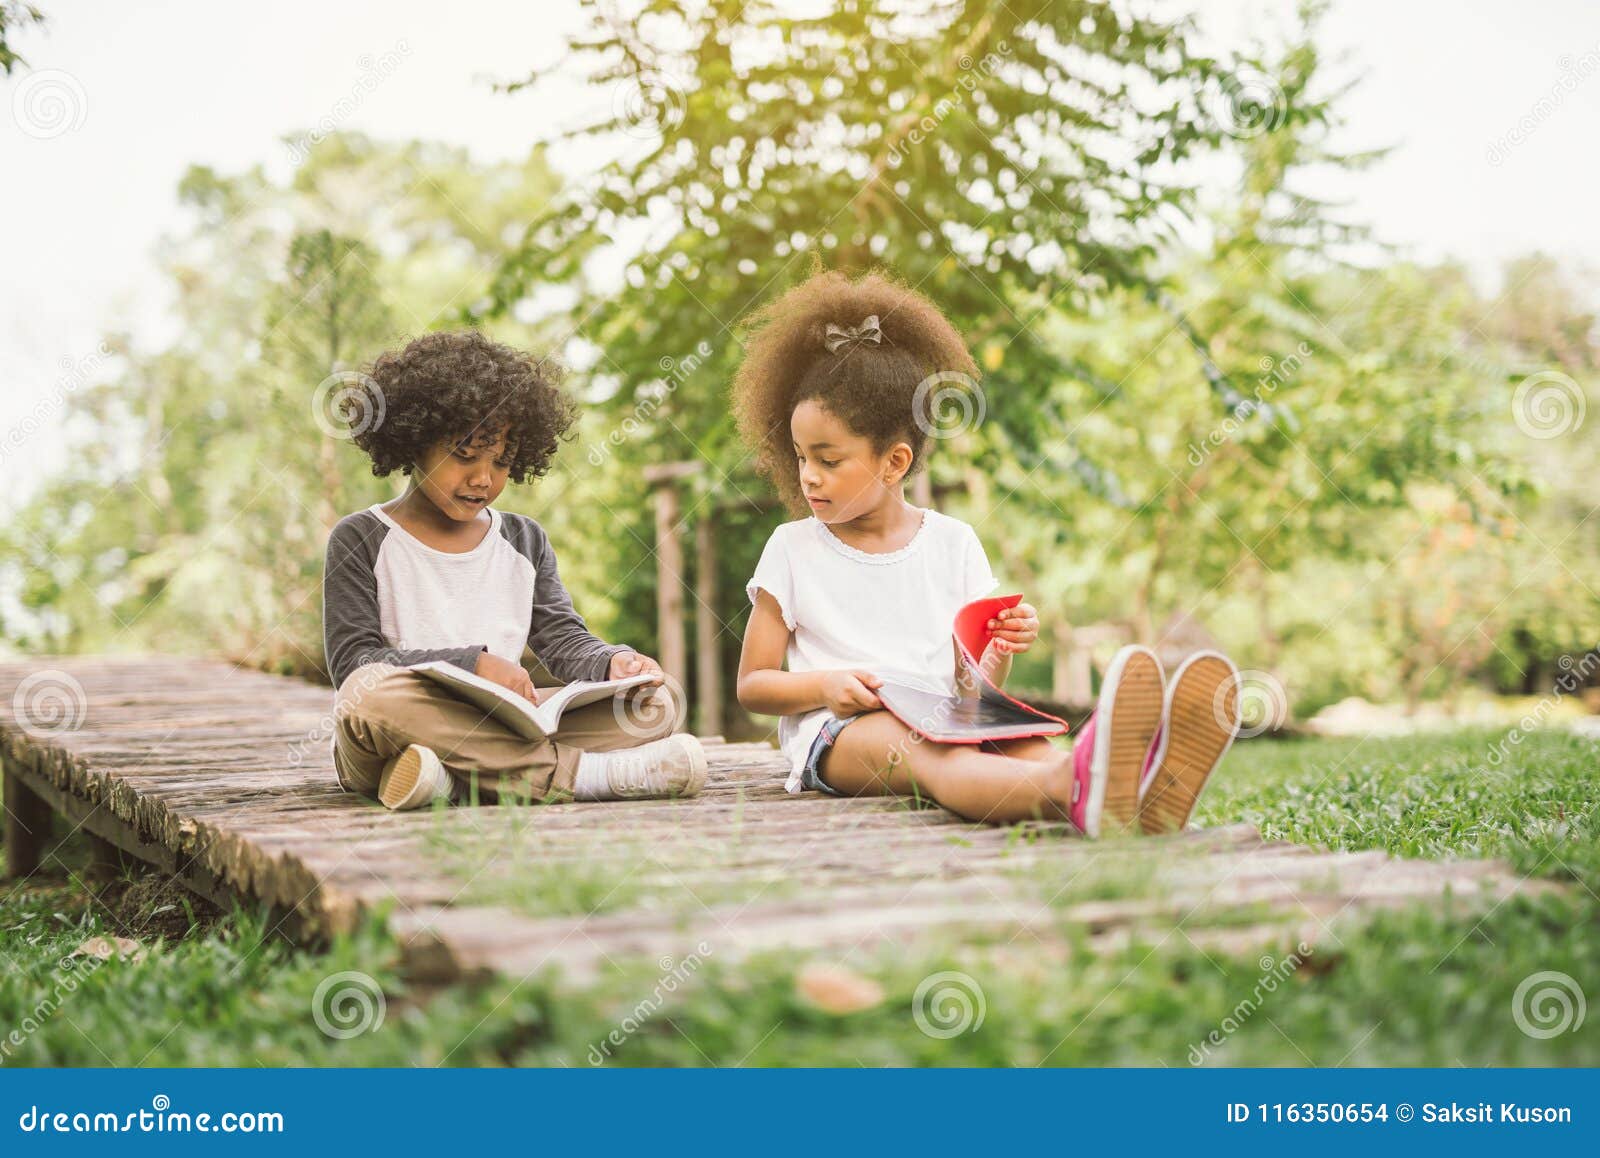 little child reading with friend